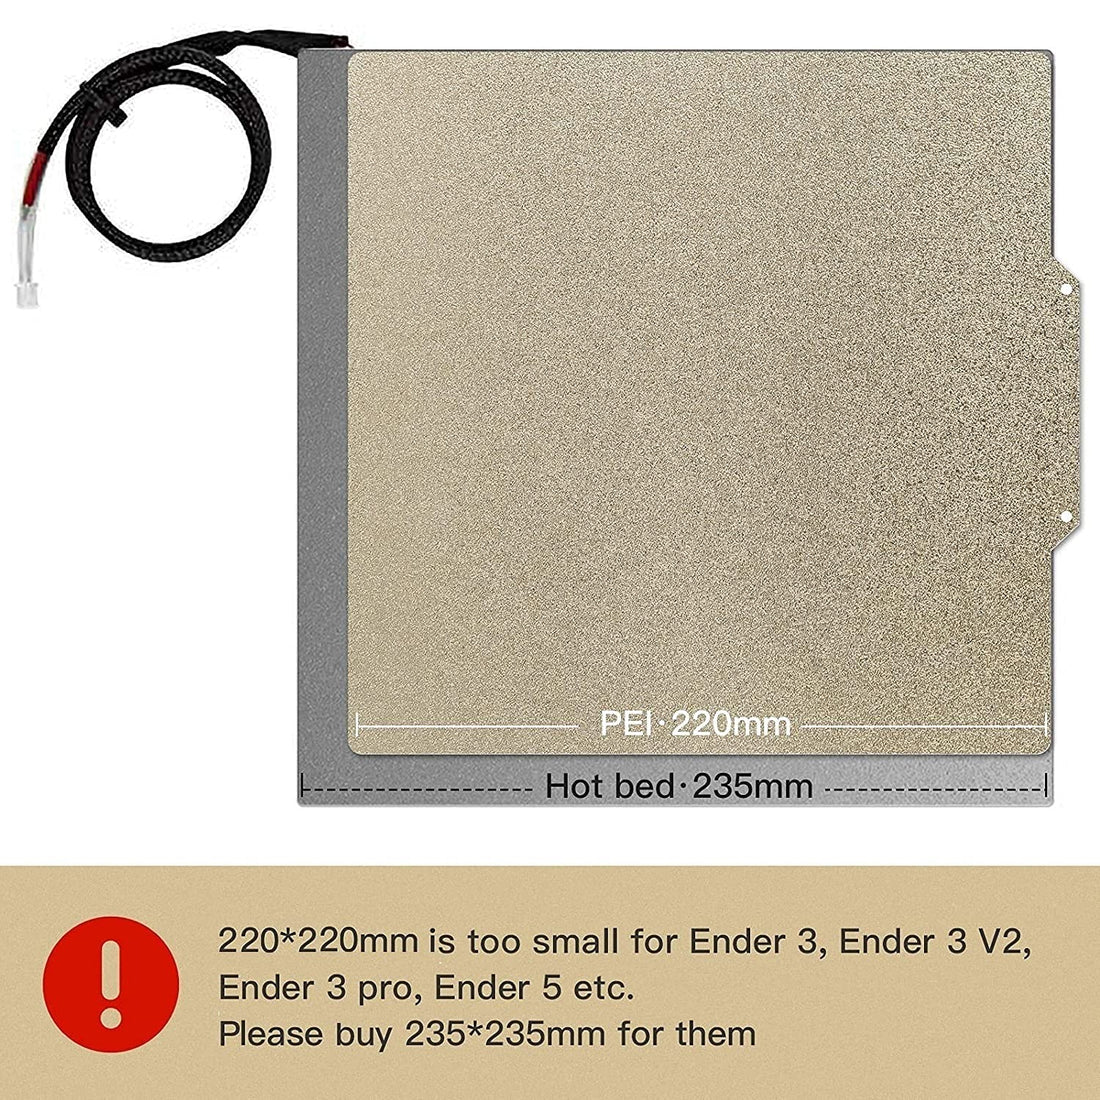 HICTOP PEI Sheet PEI Spring Steel 235x235 and Magnetic Build Plate with Adhesive PEI Bed for Ender-3 Pro/Neo, Ender-3 V2/Neo，Ender-3/Neo 3D Printers